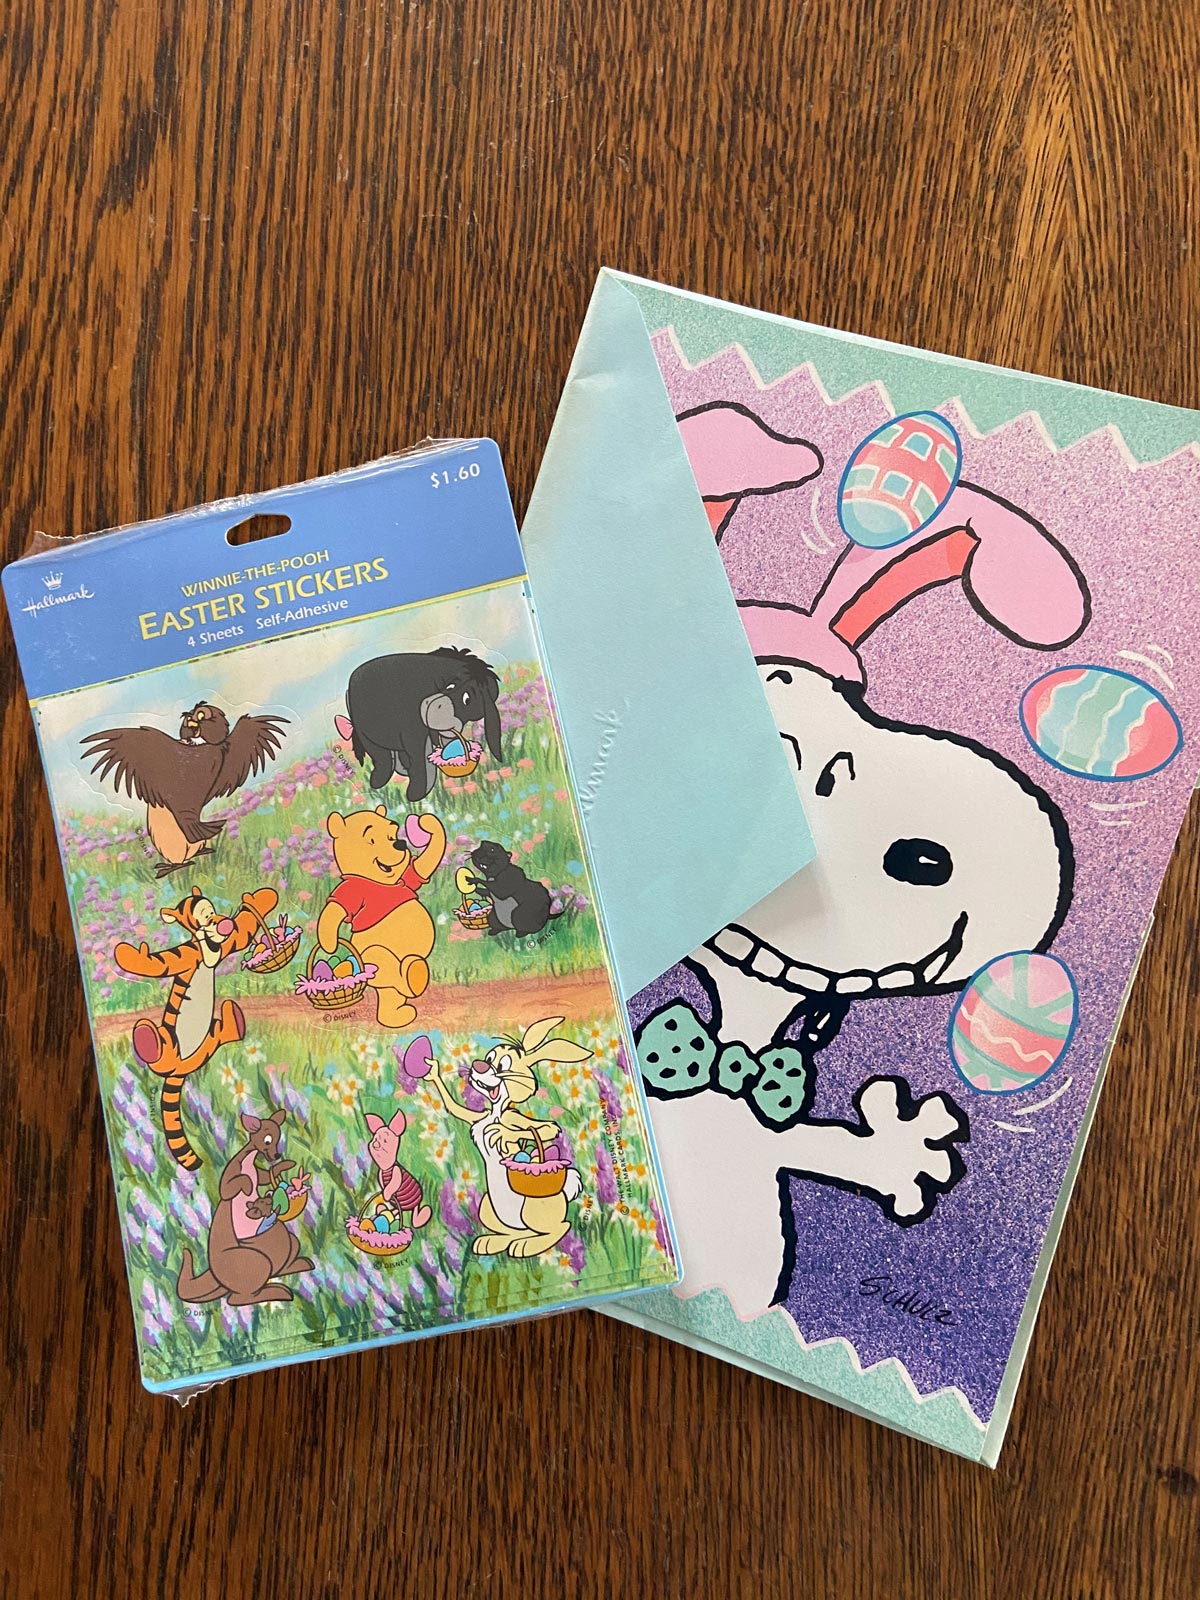 Snooper Easter Card with a pack of Winnie the Pooh Easter stickers on top